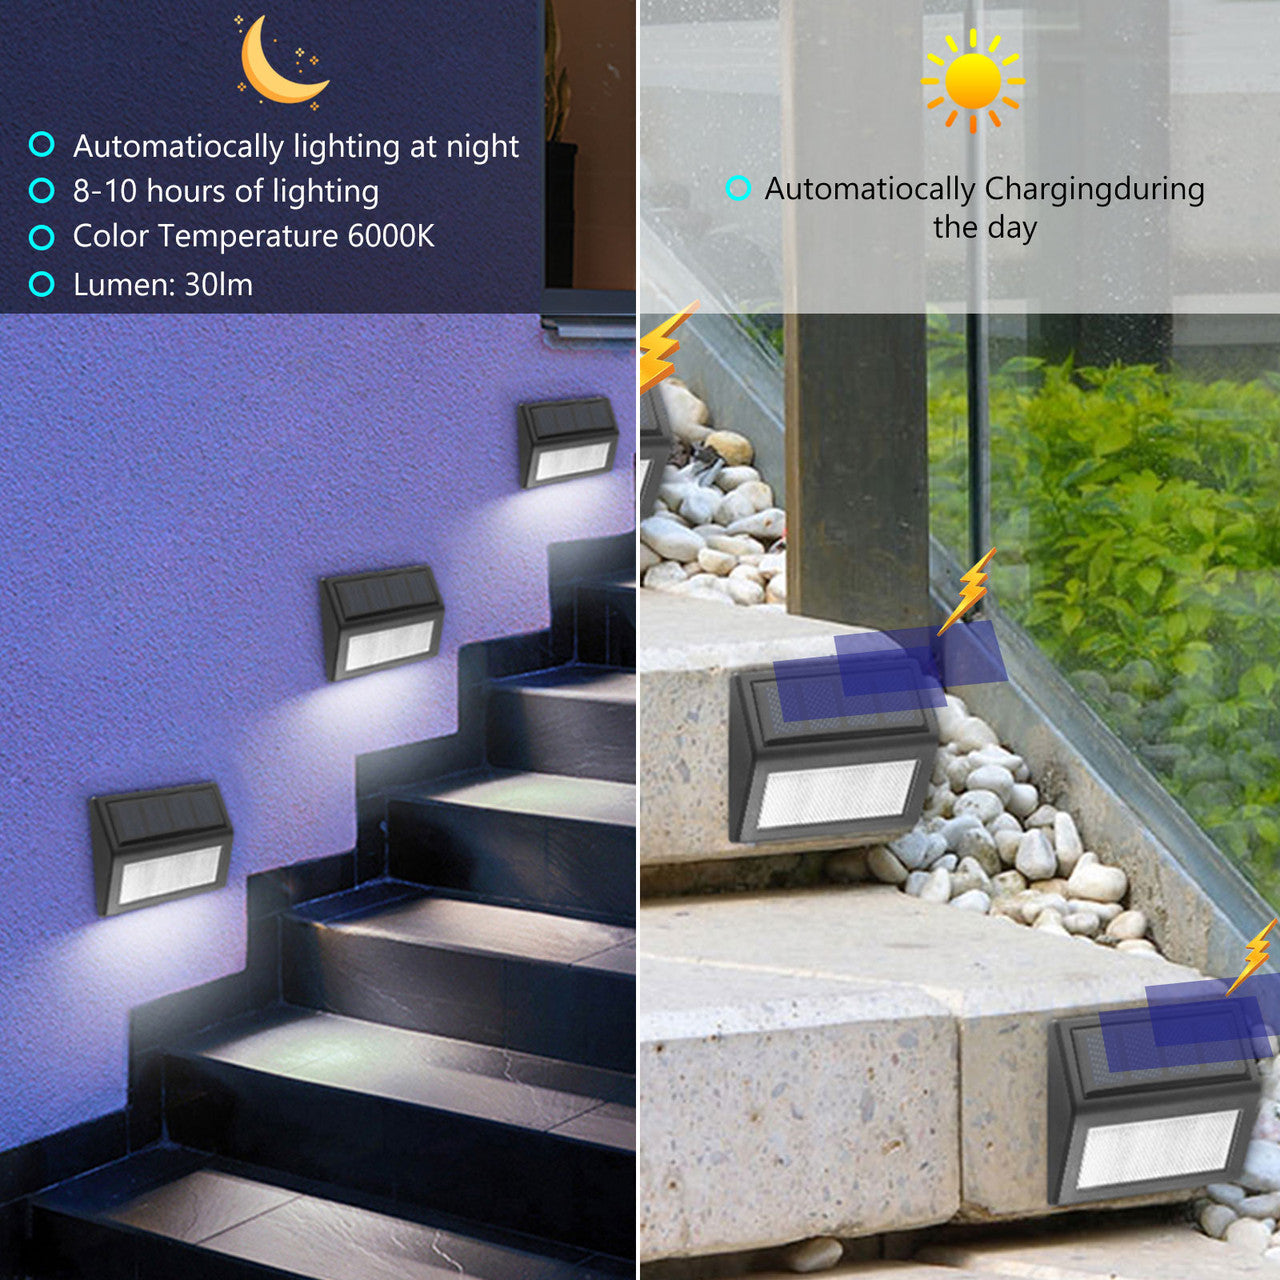 Solar LED Stair Lights, Water Resistant Wireless Automatic Sensor Step Lights, Wall Mount Decorative Outdoor Deck Lighting, Path Security Lamps for Driveway Fences Pathway Staircase, 6Pcs